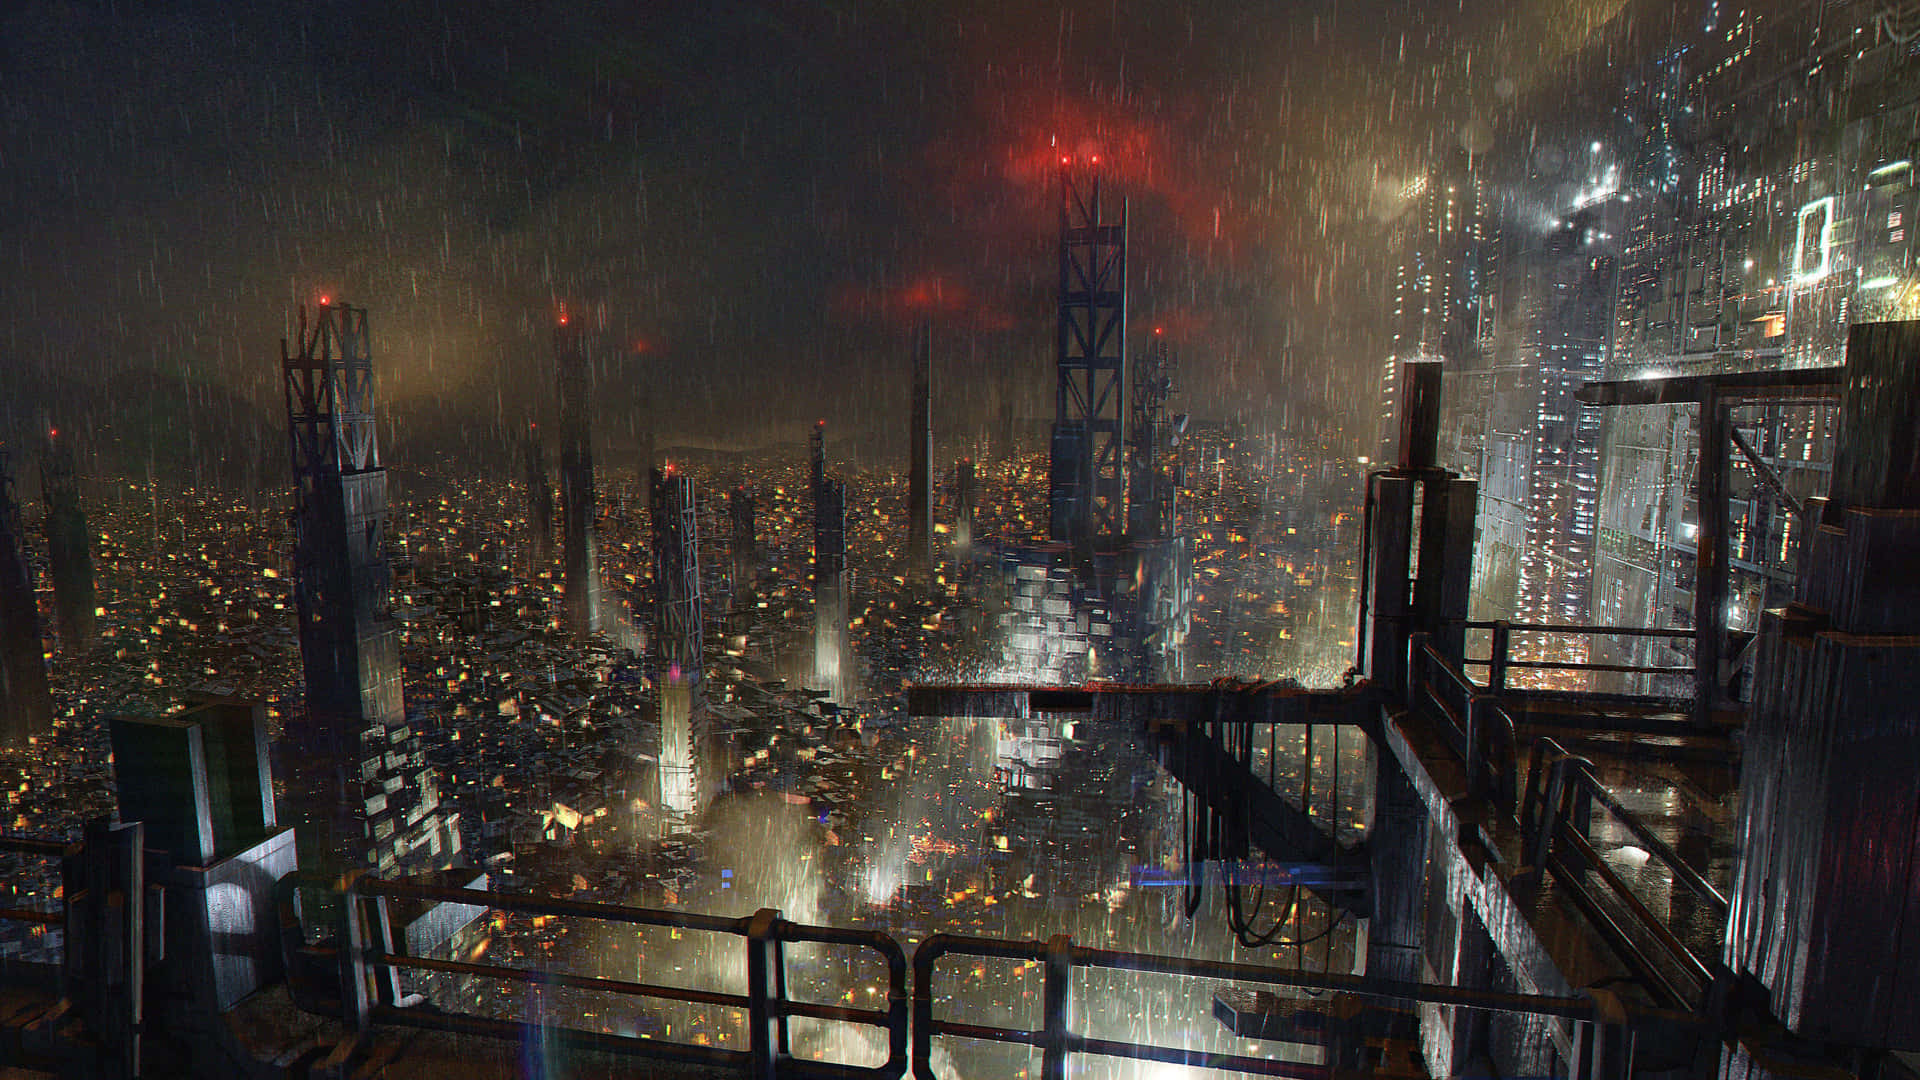 Mankind Divided City View Night